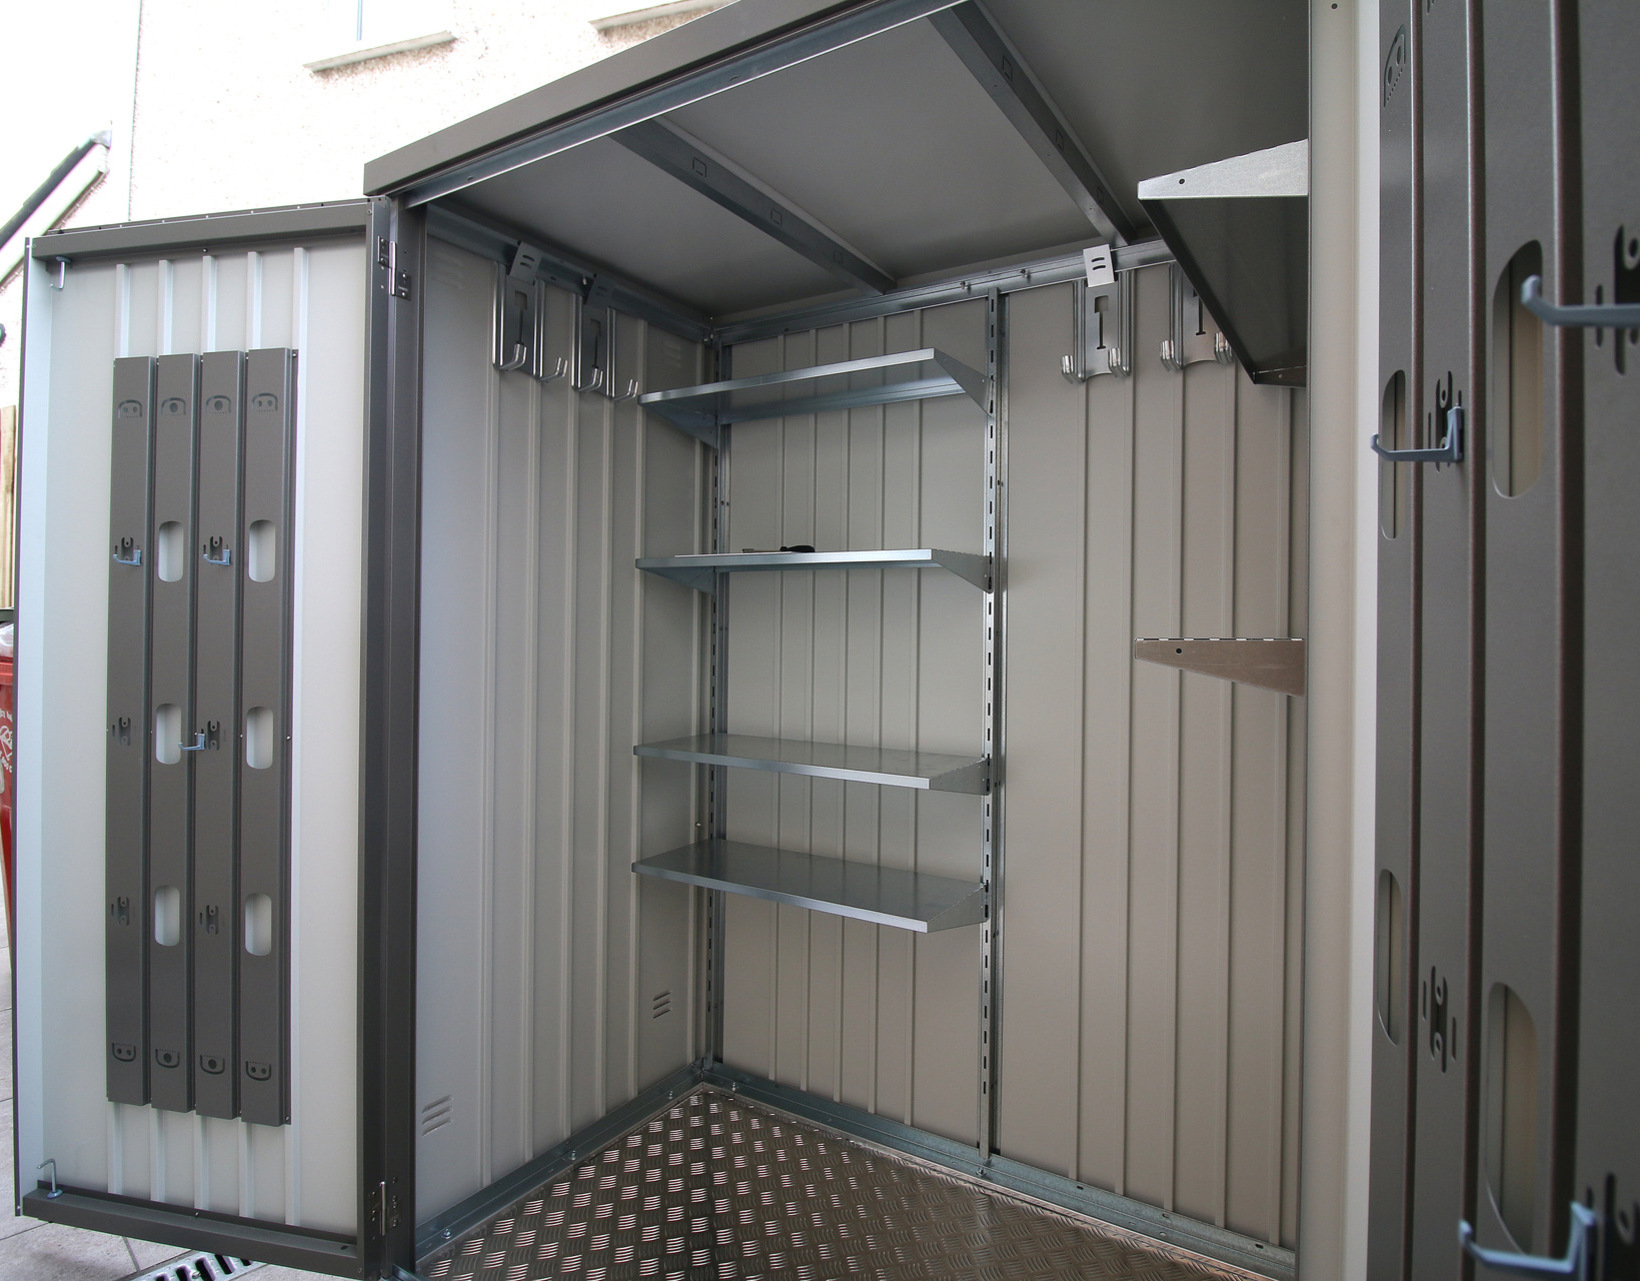 The spacious storage capacity of the Biohort Equipment Locker 150 in metallic quartz grey, supplied + fitted in Beaumont, Dublin 9 | Stylish, Versatile, Secure & Rainproof Patio Storage Solutions | FREE Fitting